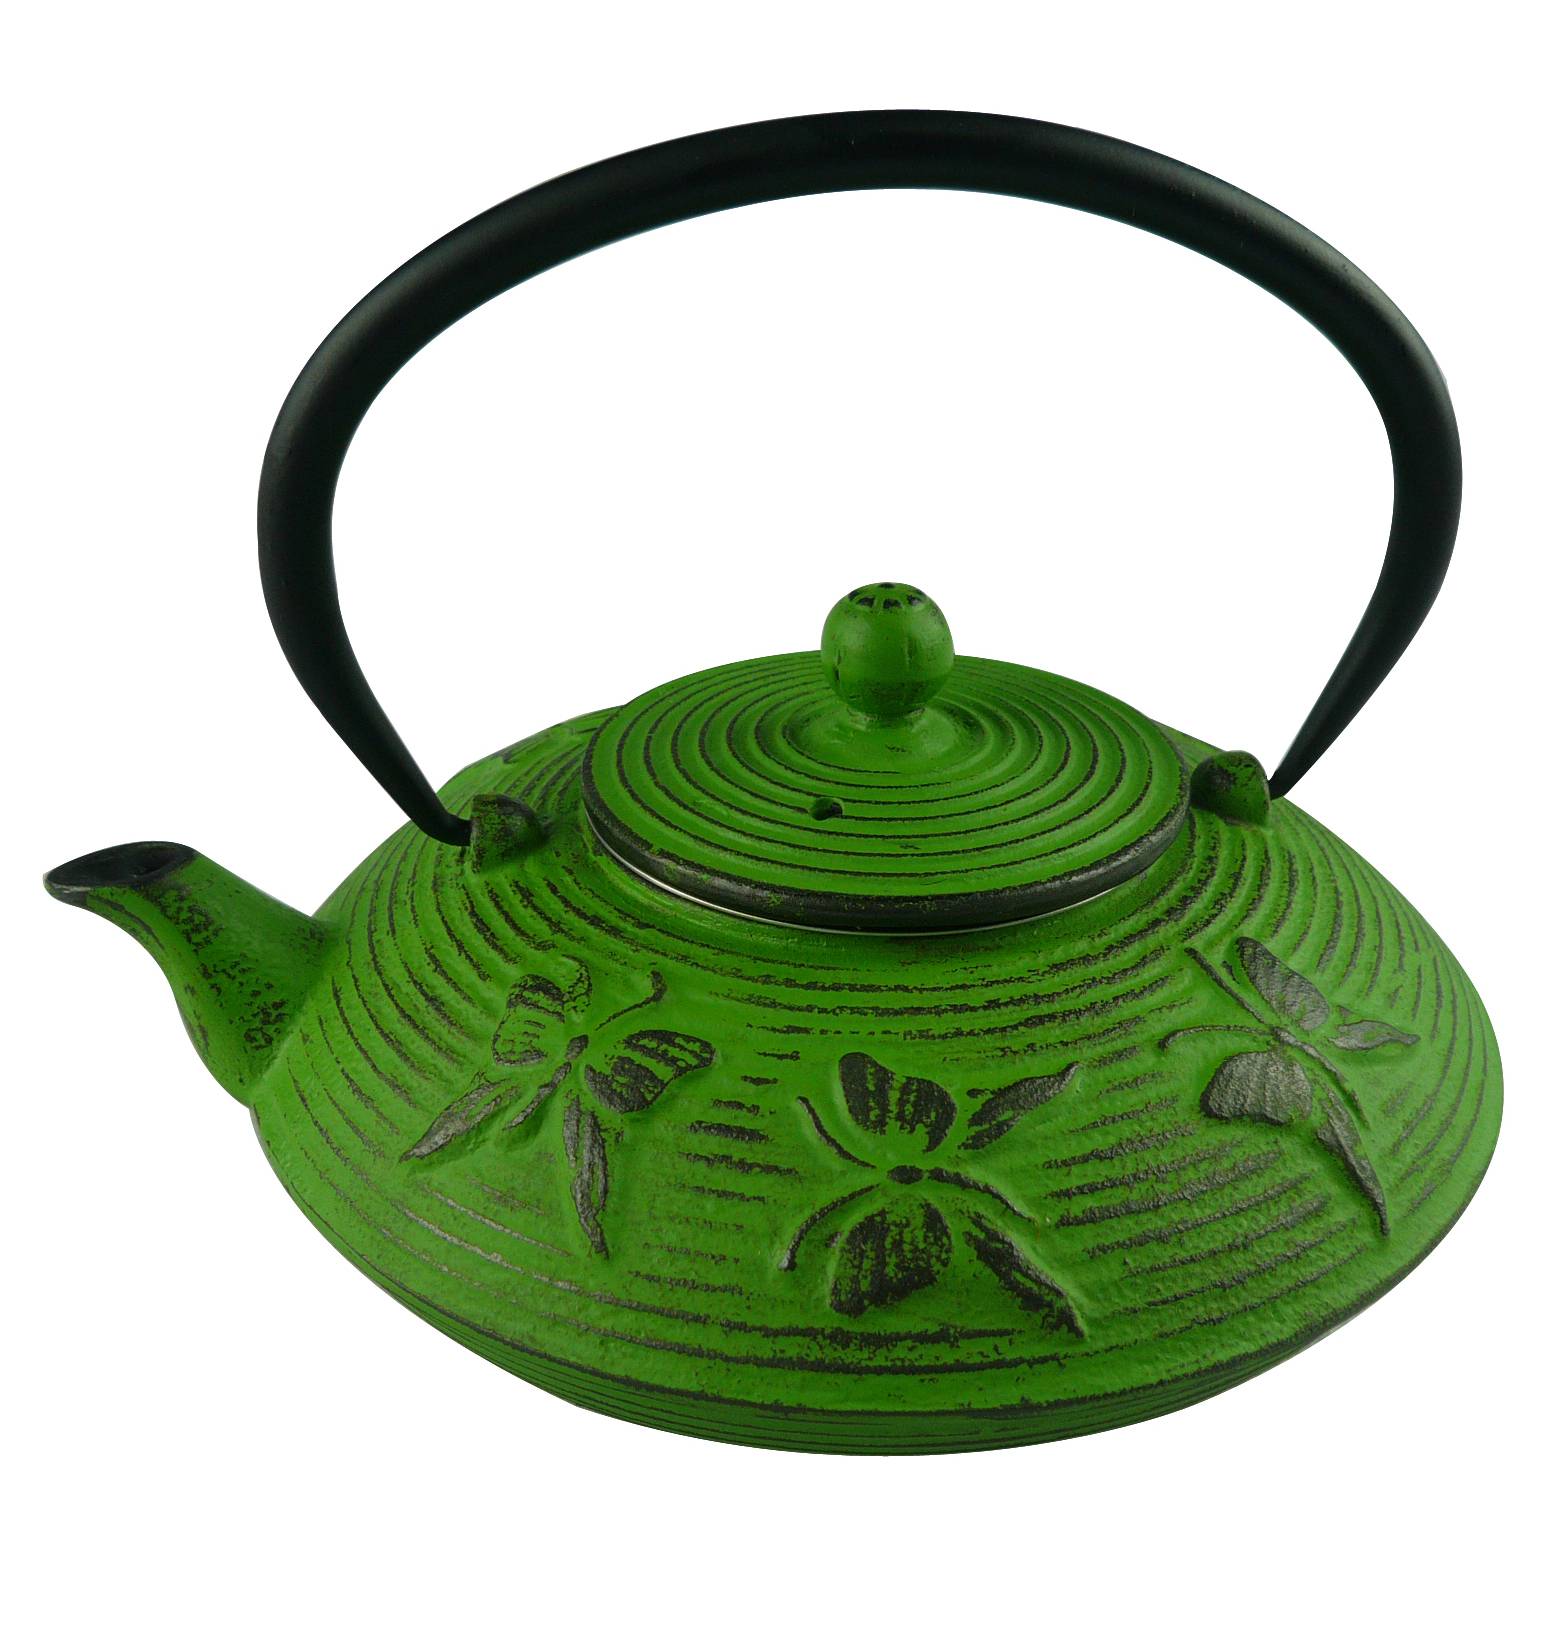 Hot Sale Enamel Cast Iron Coated Teapot Kettle With Stain Steel Infuser Teapot